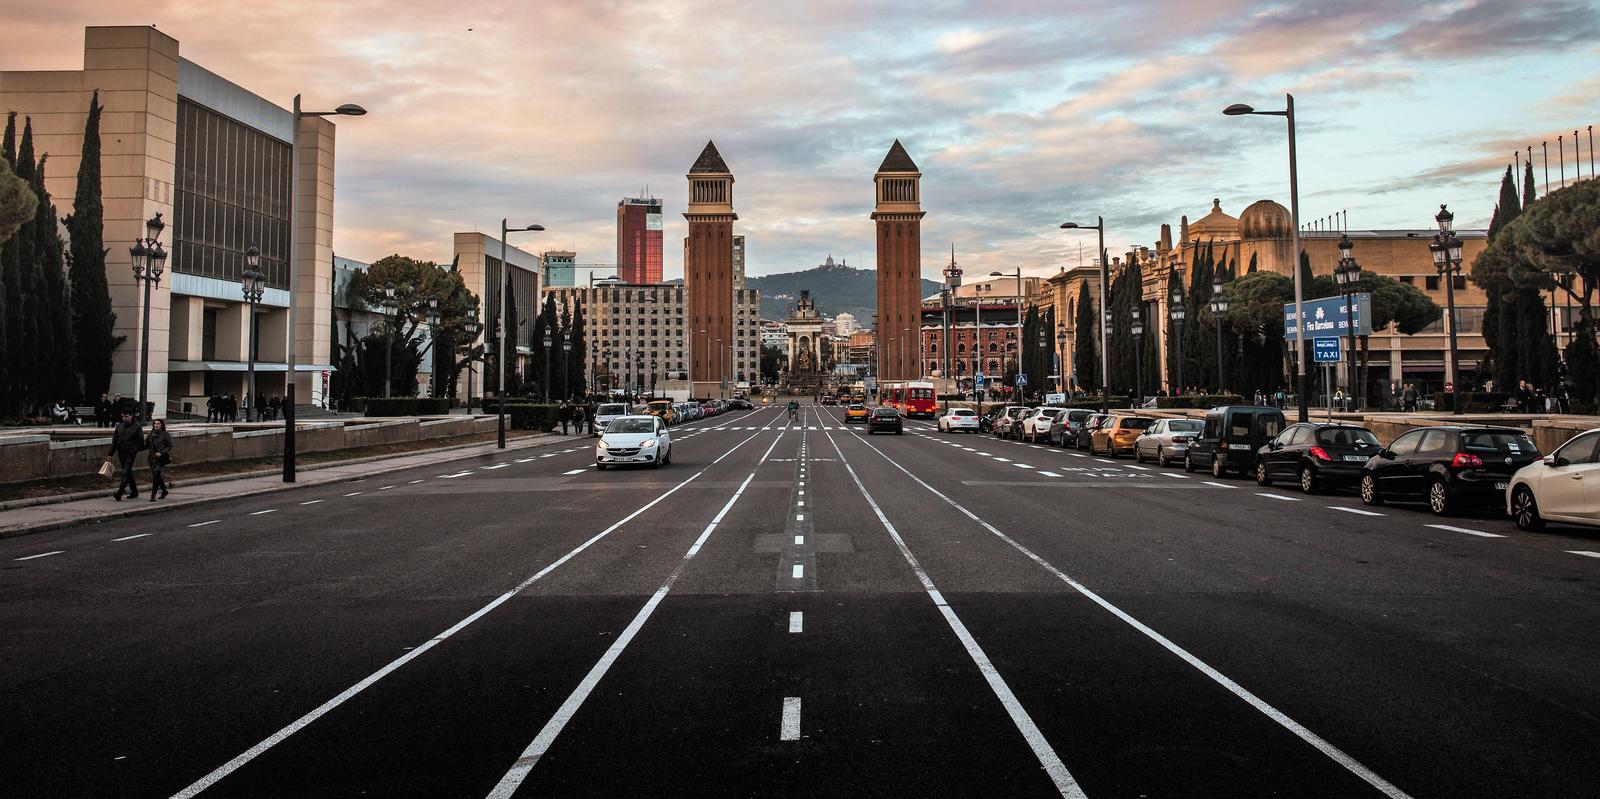 A Day in the Data Life of Barcelona